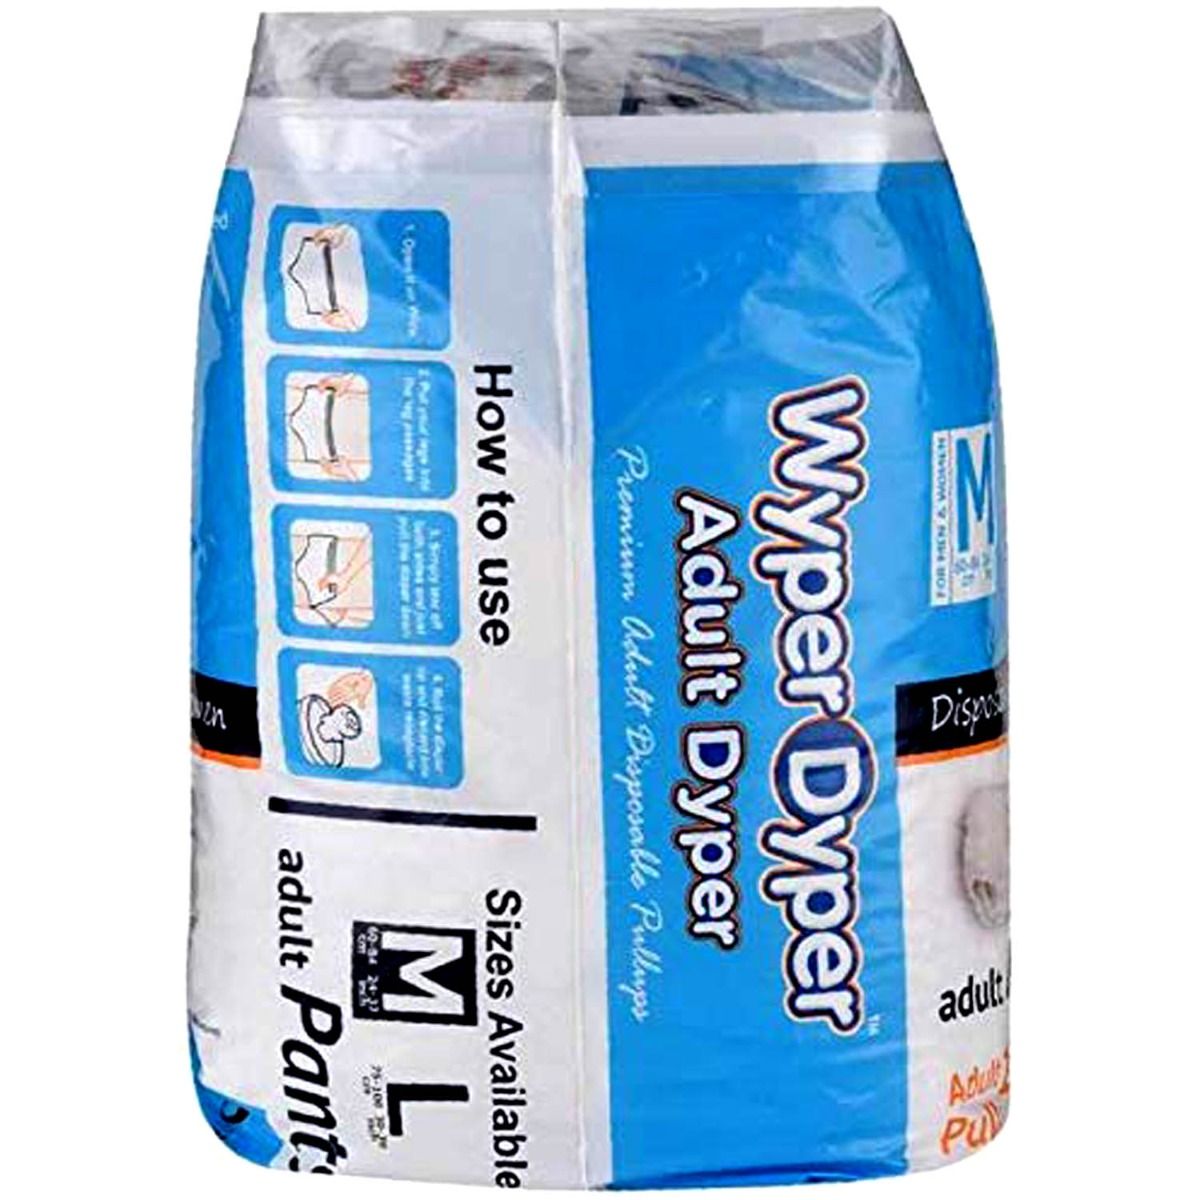 Wyper Adult Diaper Pants Large, 10 Count, Pack of 1 